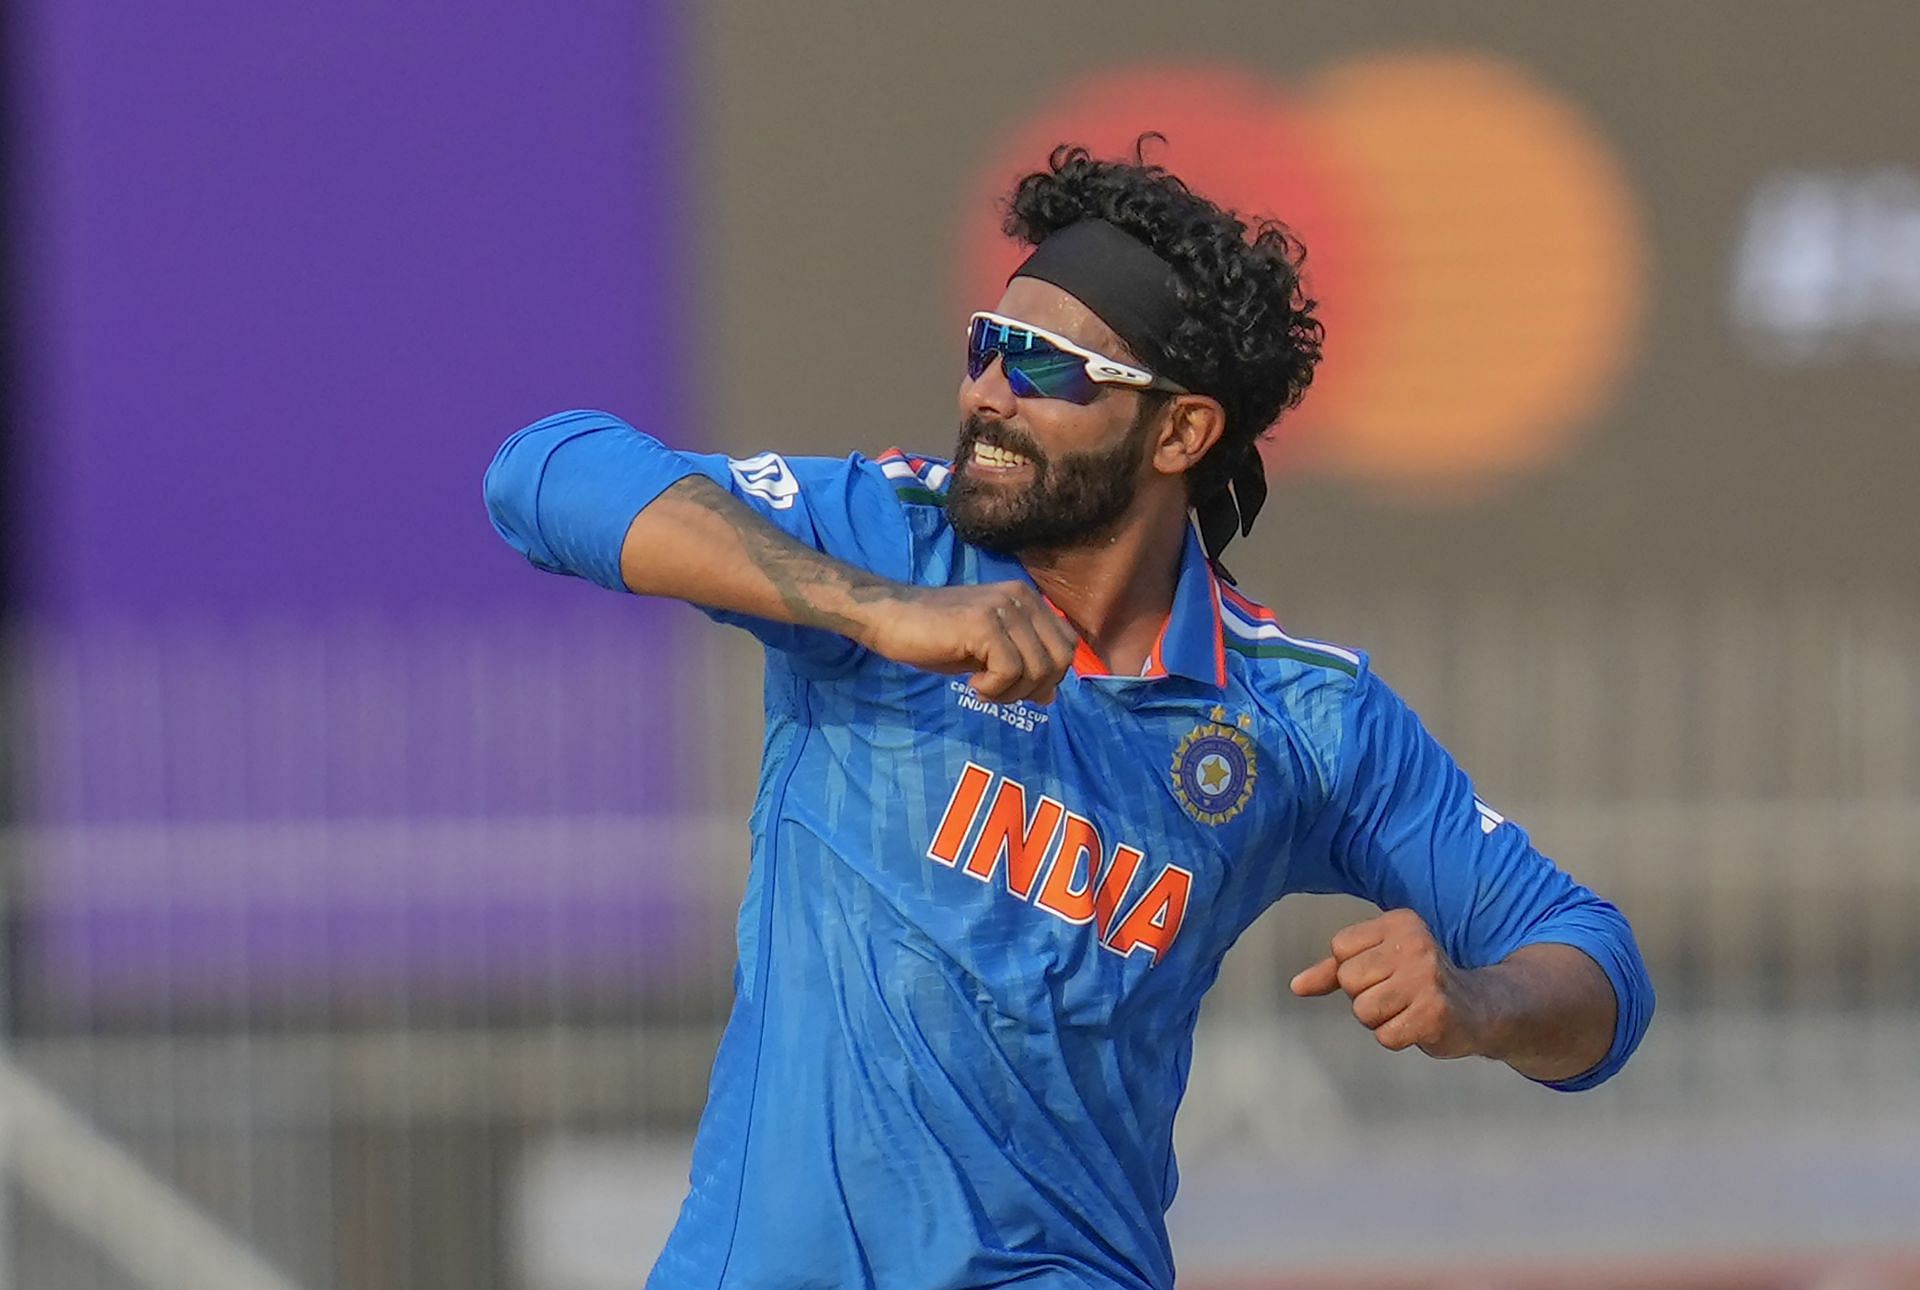 Ravindra Jadeja was the pick of the Indian bowlers